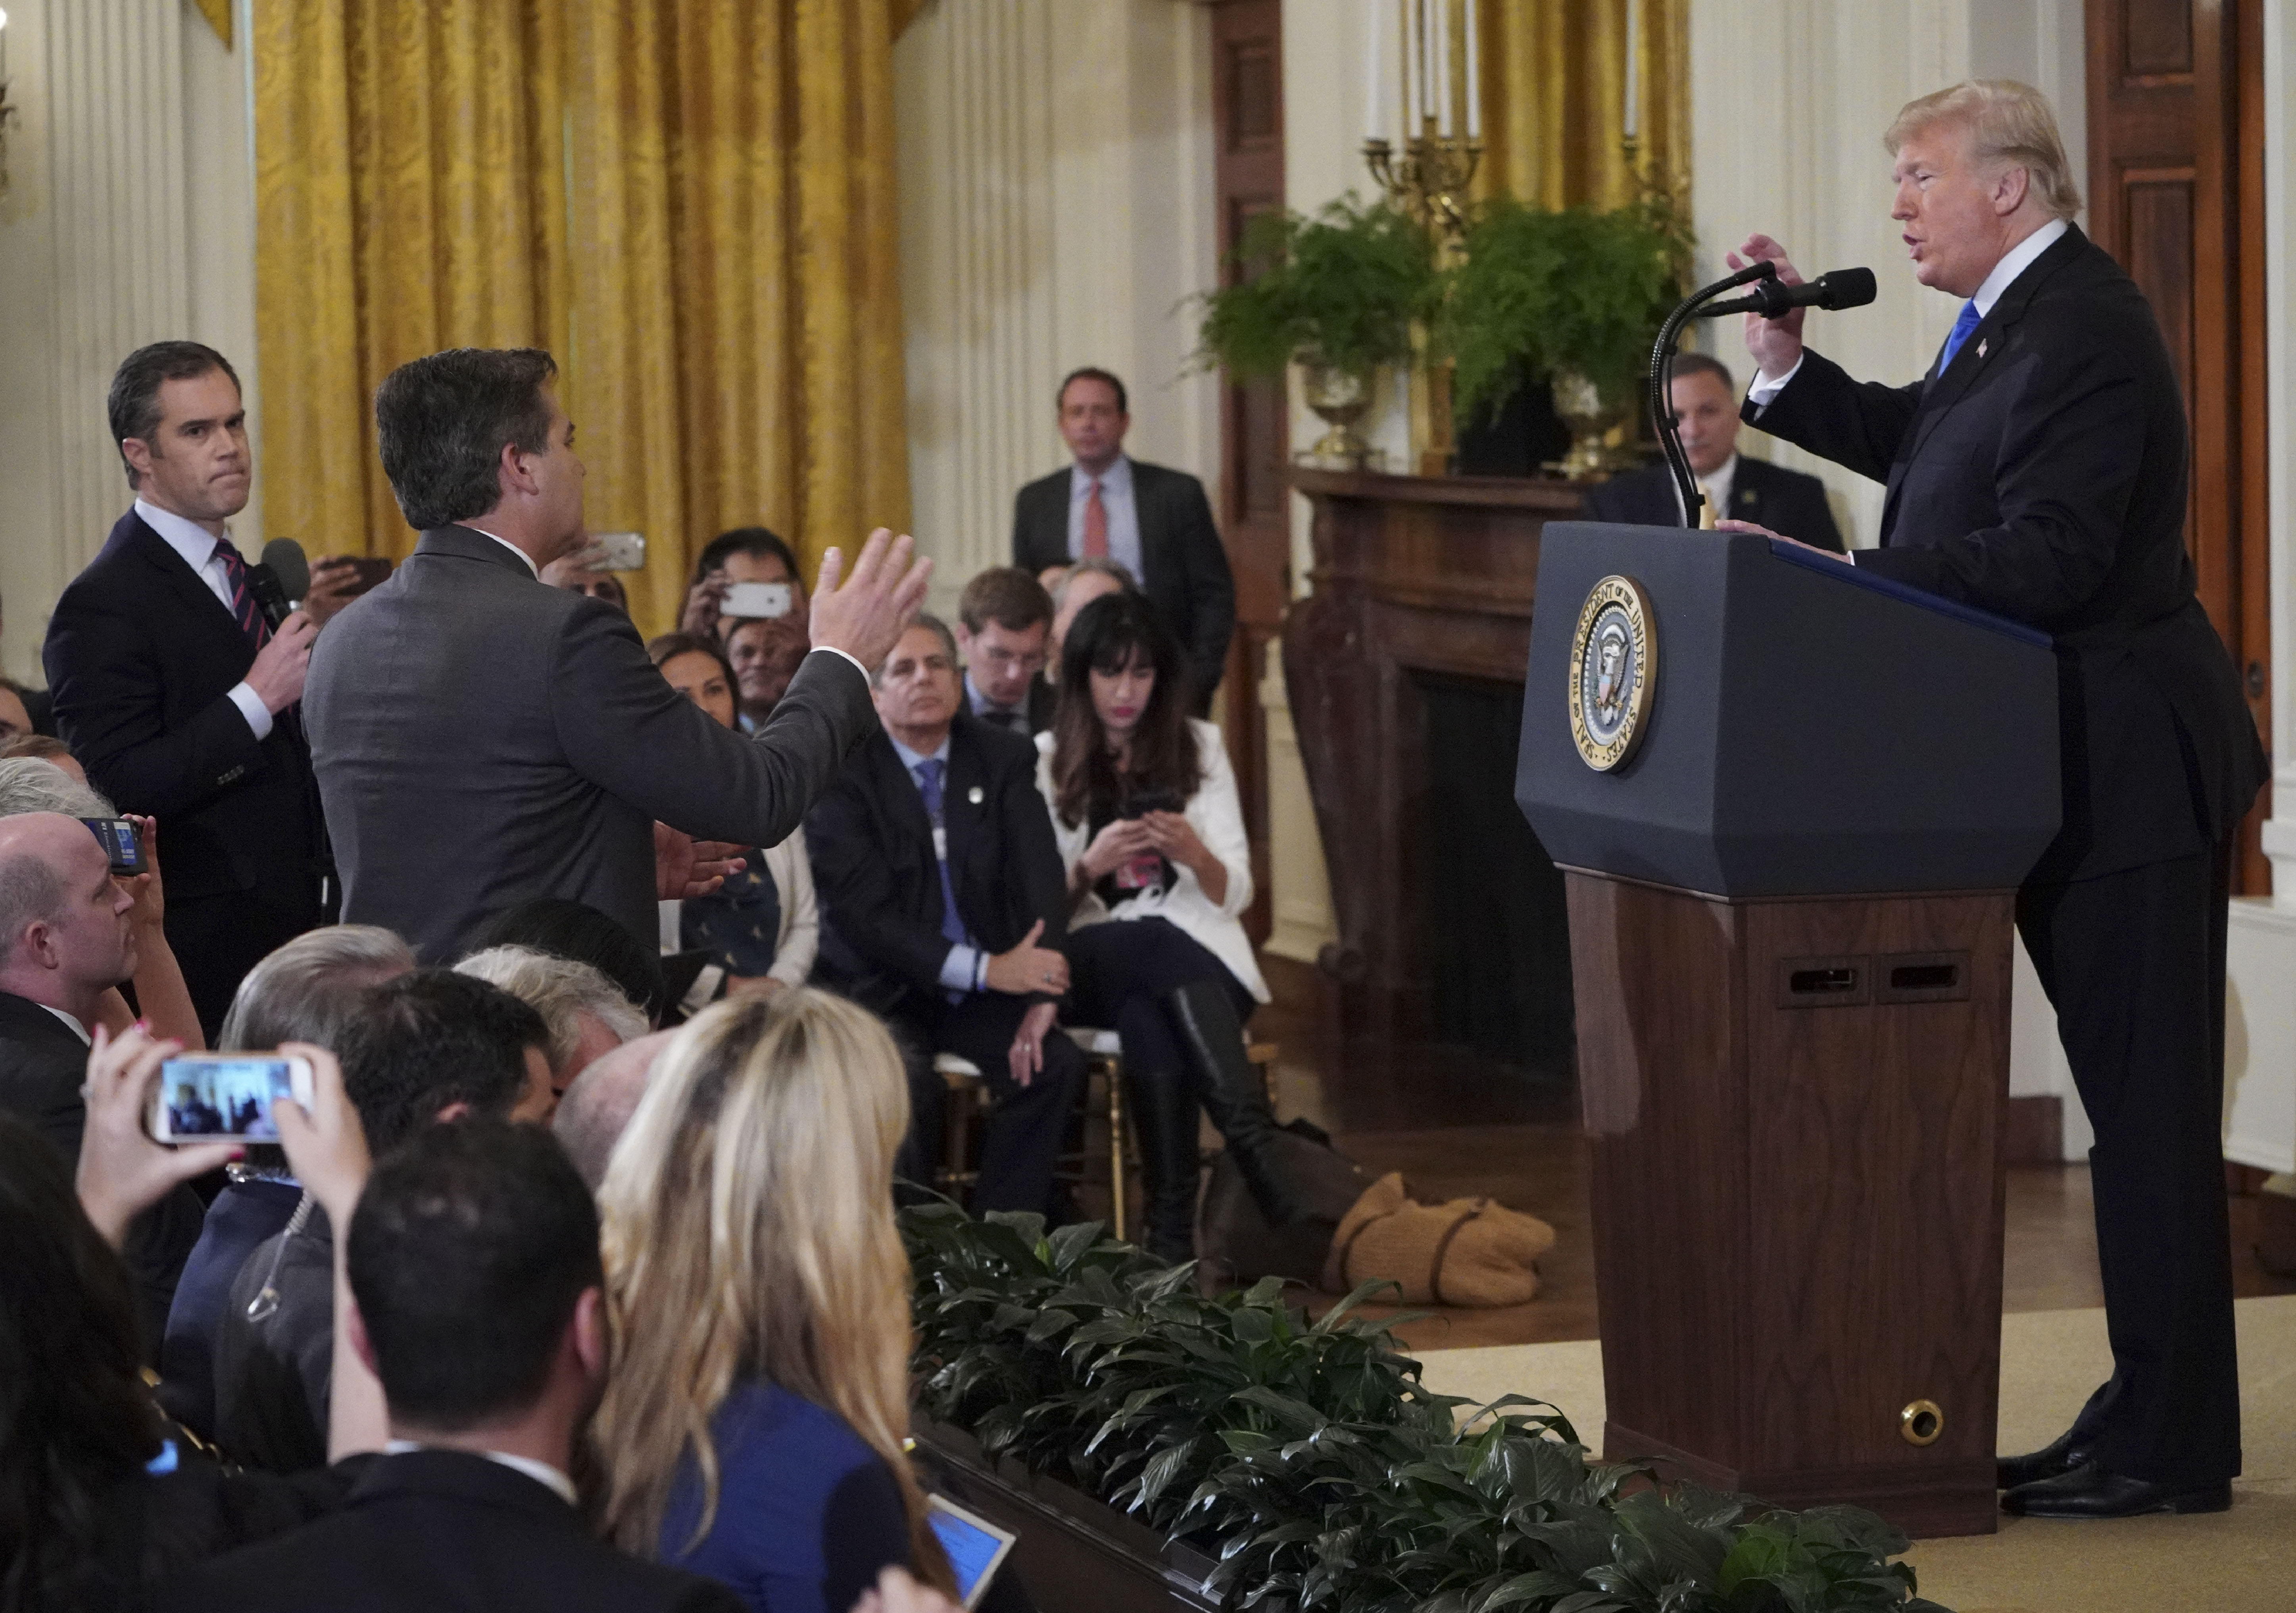 US President Donald Trump (R) gets into a heated exchange with CNN chief White House correspondent Jim Acosta (C) as NBC correspondent Peter Alexander (L) looks on during a post-election press conference in the East Room of the White House in Washington, DC on November 7, 2018. (Photo by Mandel NGAN / AFP)